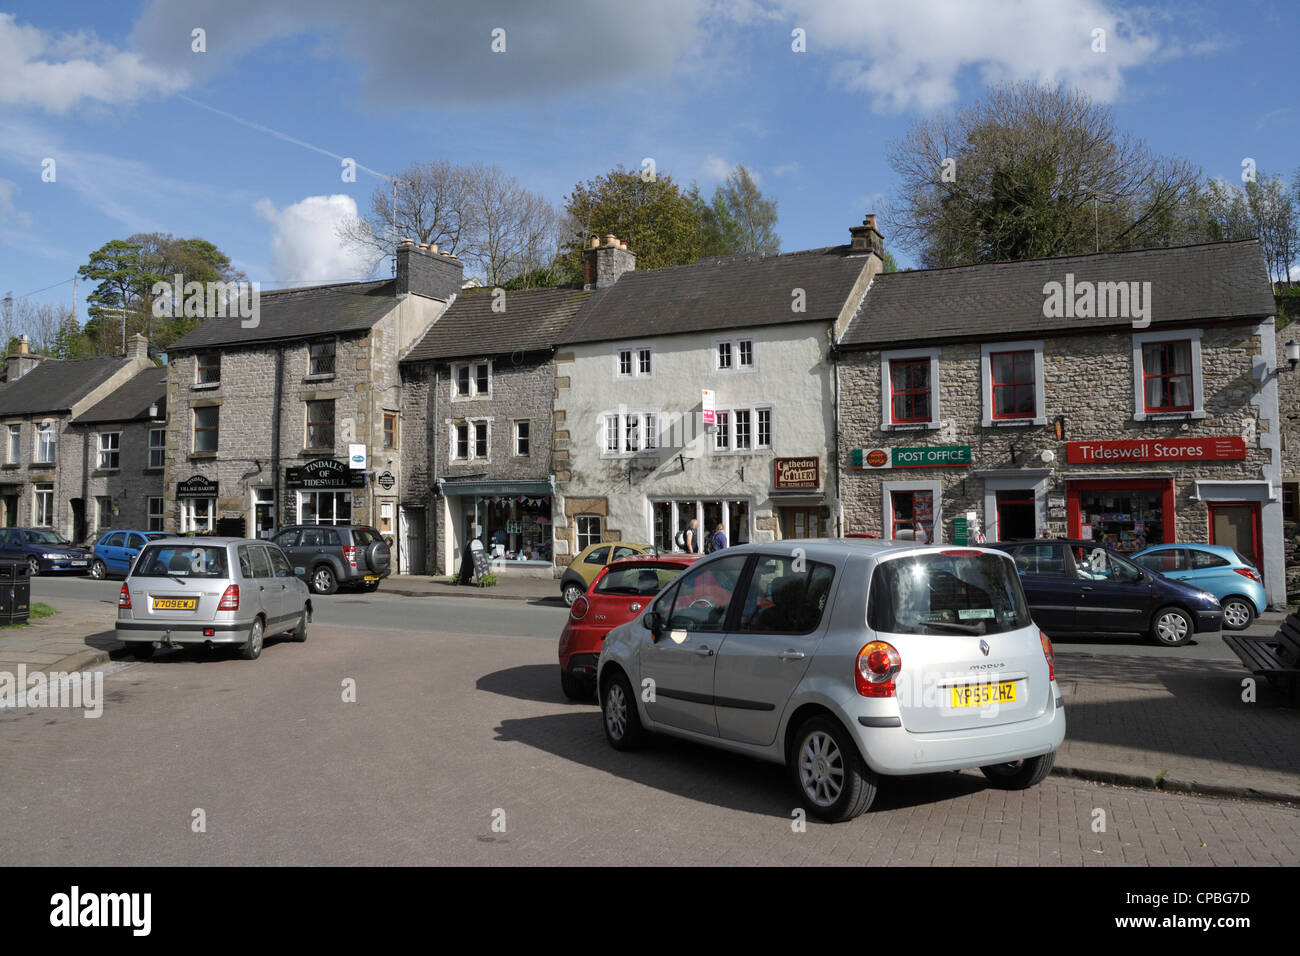 Tideswell village in the Peak district in Derbyshire, England UK, English rural village Parked cars Stock Photo